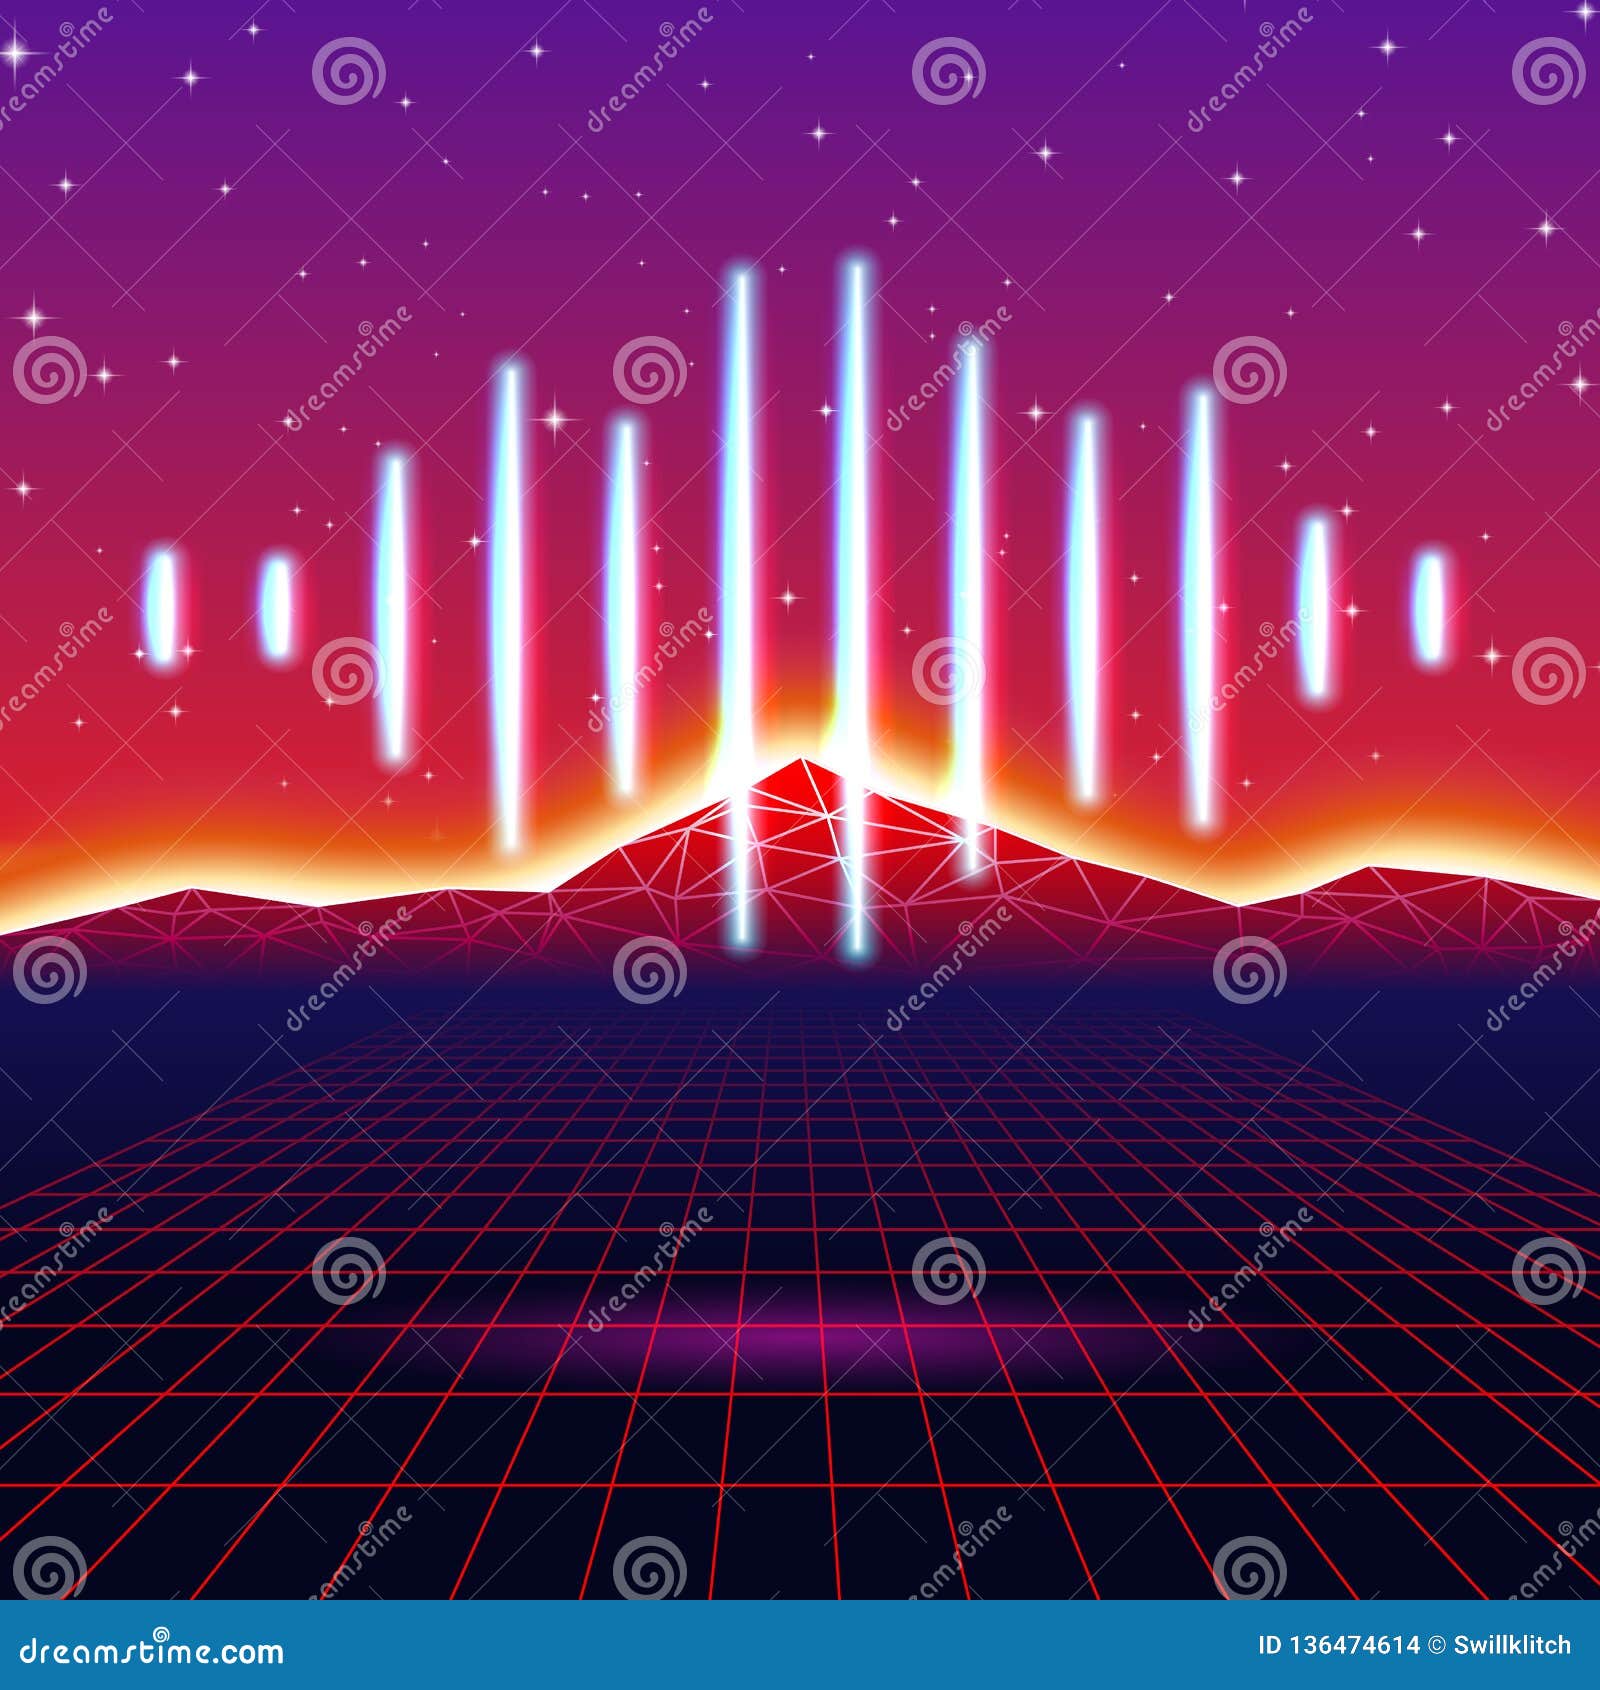 Retro Gaming Neon Background with Shiny Music Wave Stock Vector -  Illustration of game, geometric: 136474614